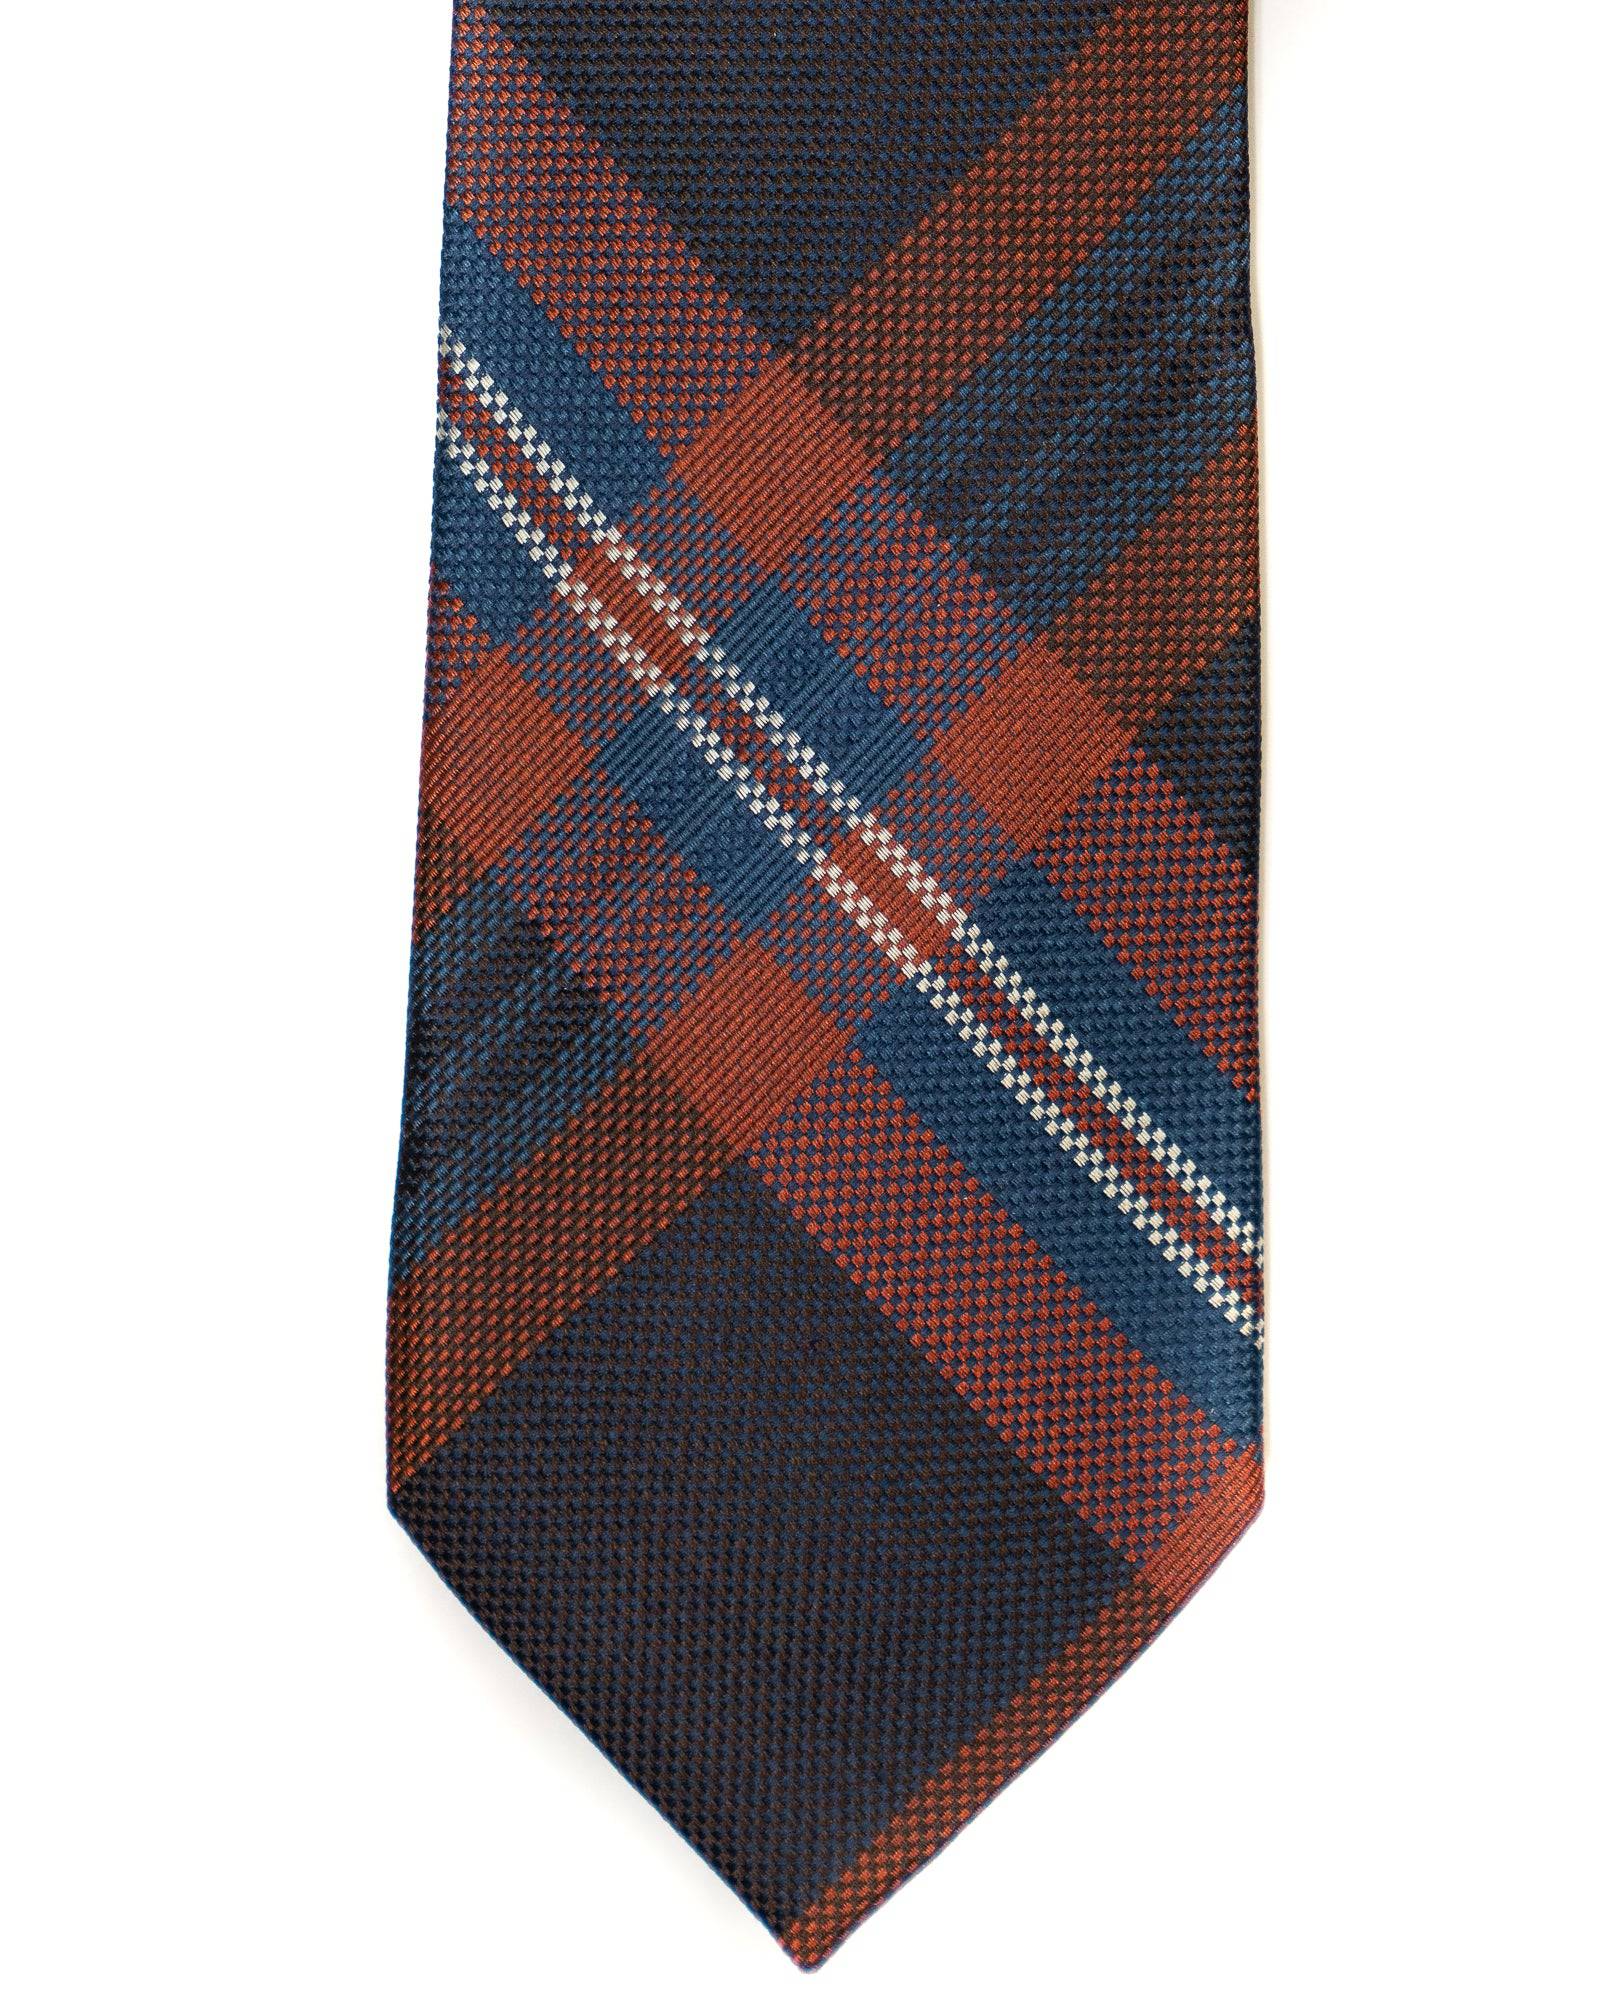 Silk Tie In Burgundy And Navy Plaid - Rainwater's Men's Clothing and Tuxedo Rental